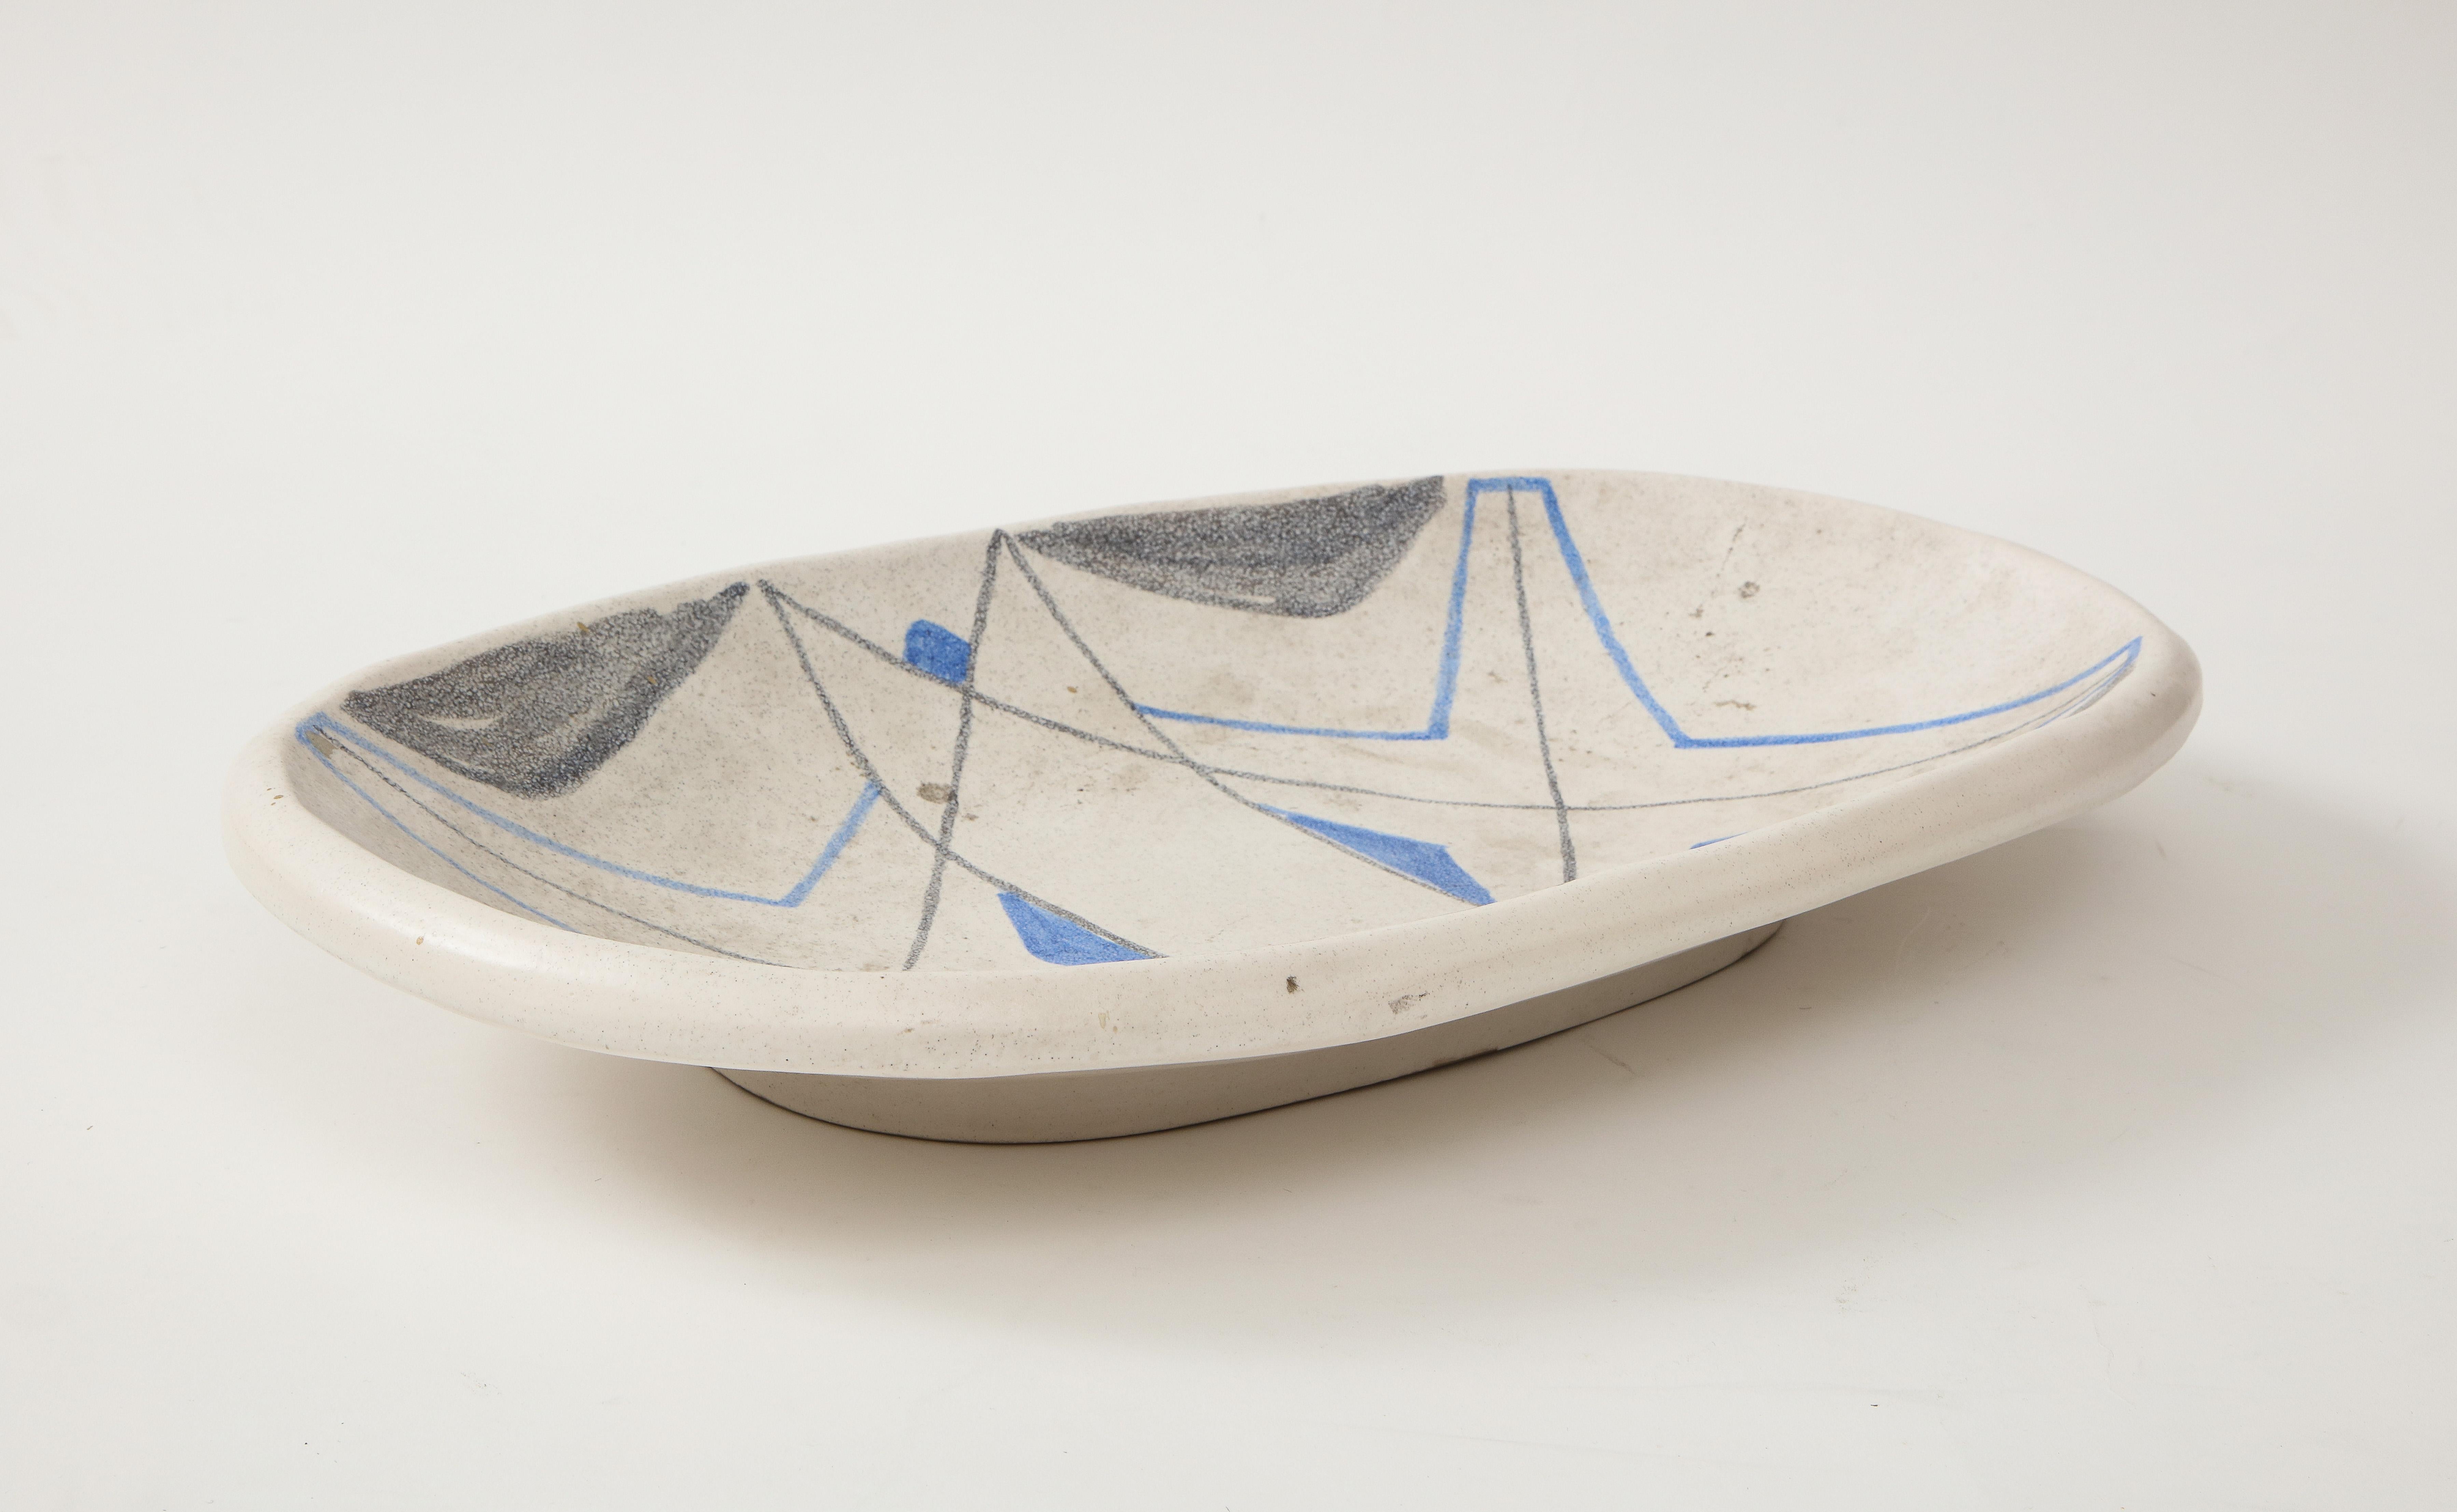 Stunning oval ceramic tray, Vallauris, France, circa 1950. 

This object's exquisite three-tone composition consists of a stunning blue and black geometric design cast against a soft grey base. This ceramic has the unique distinction of hailing